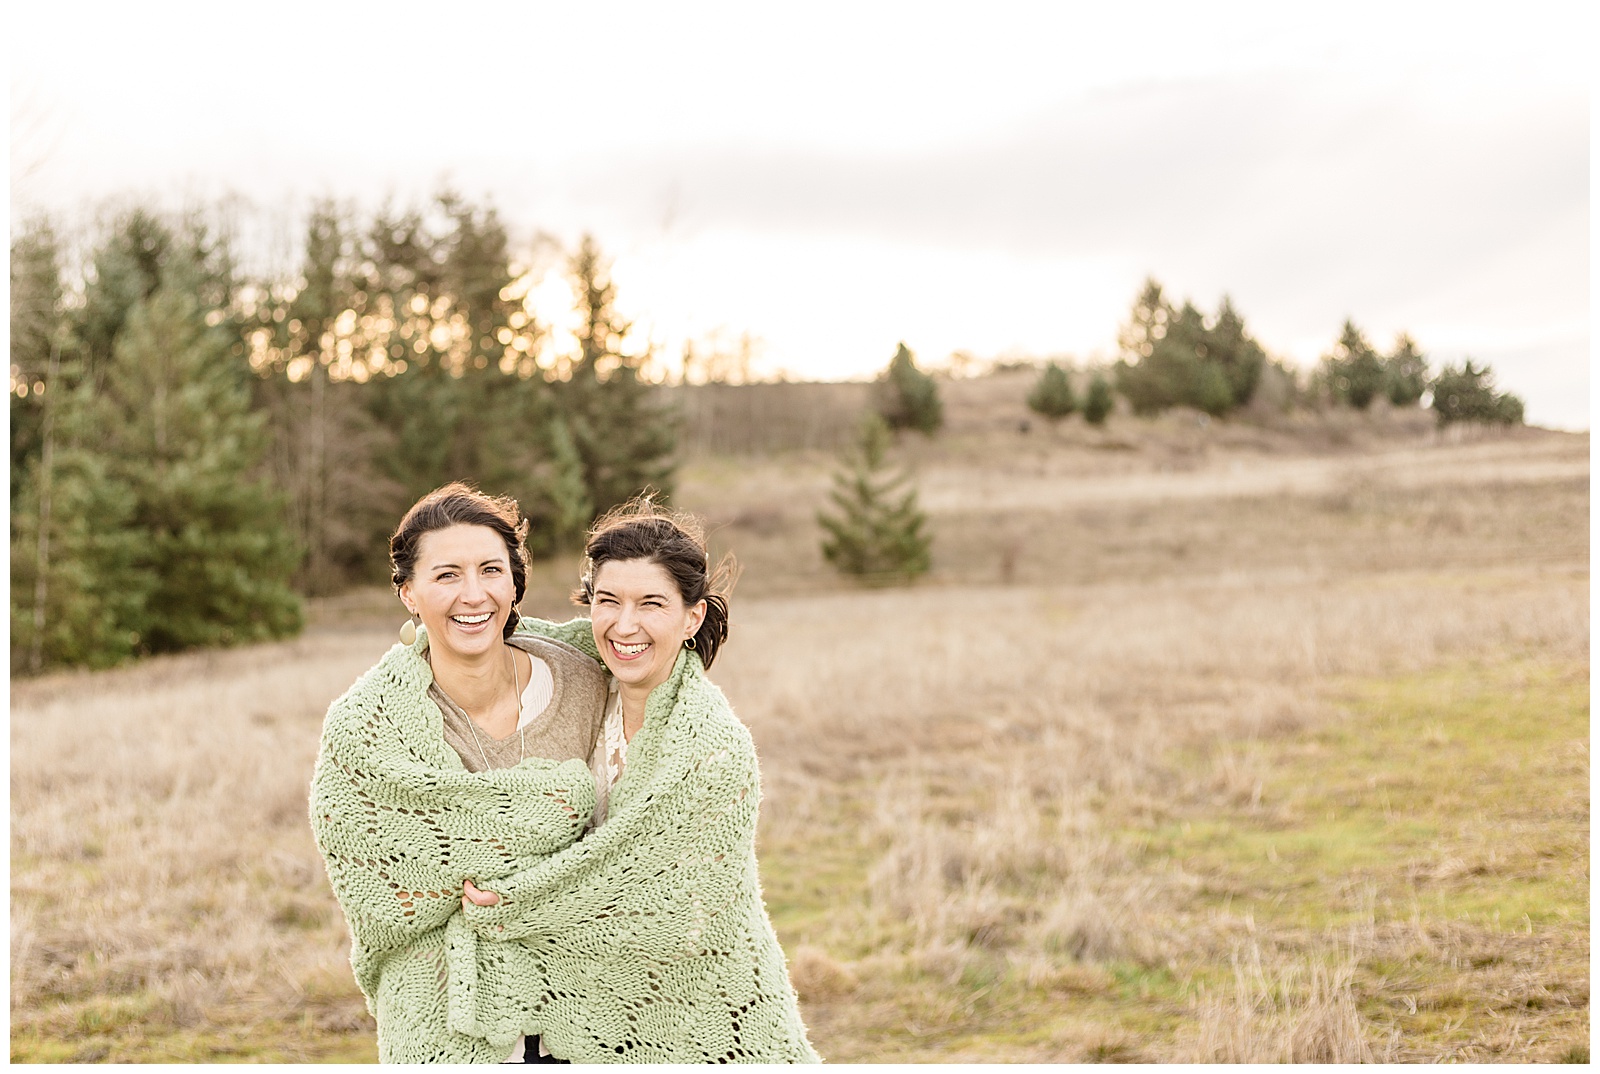 Sisters in their 20's wrapped in blanket out in nature